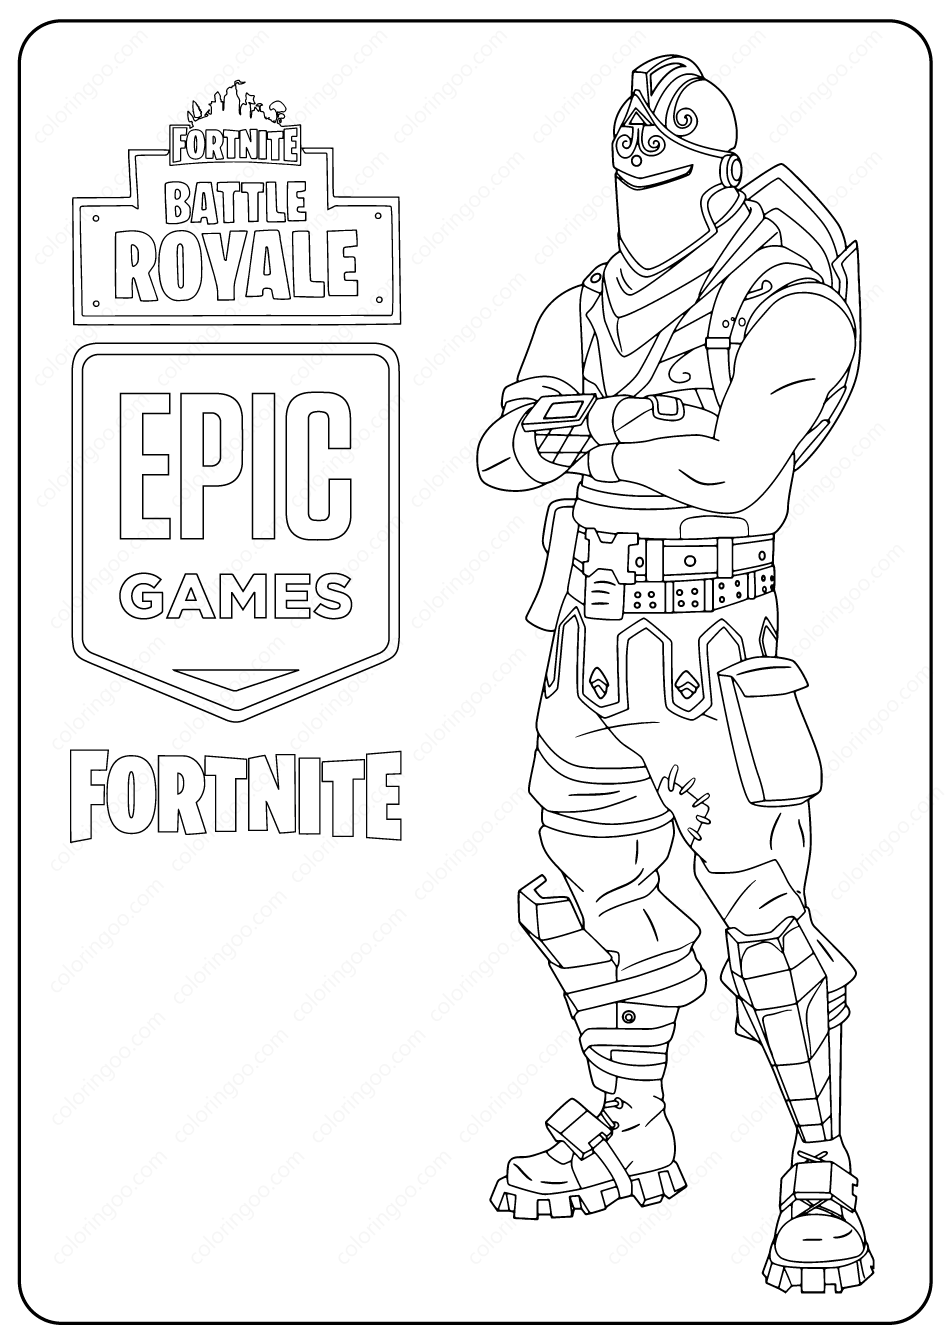 Printable Fortnite Black Knight Skin Coloring Pages | Coloring pages,  Fortnite, Free printable coloring pages